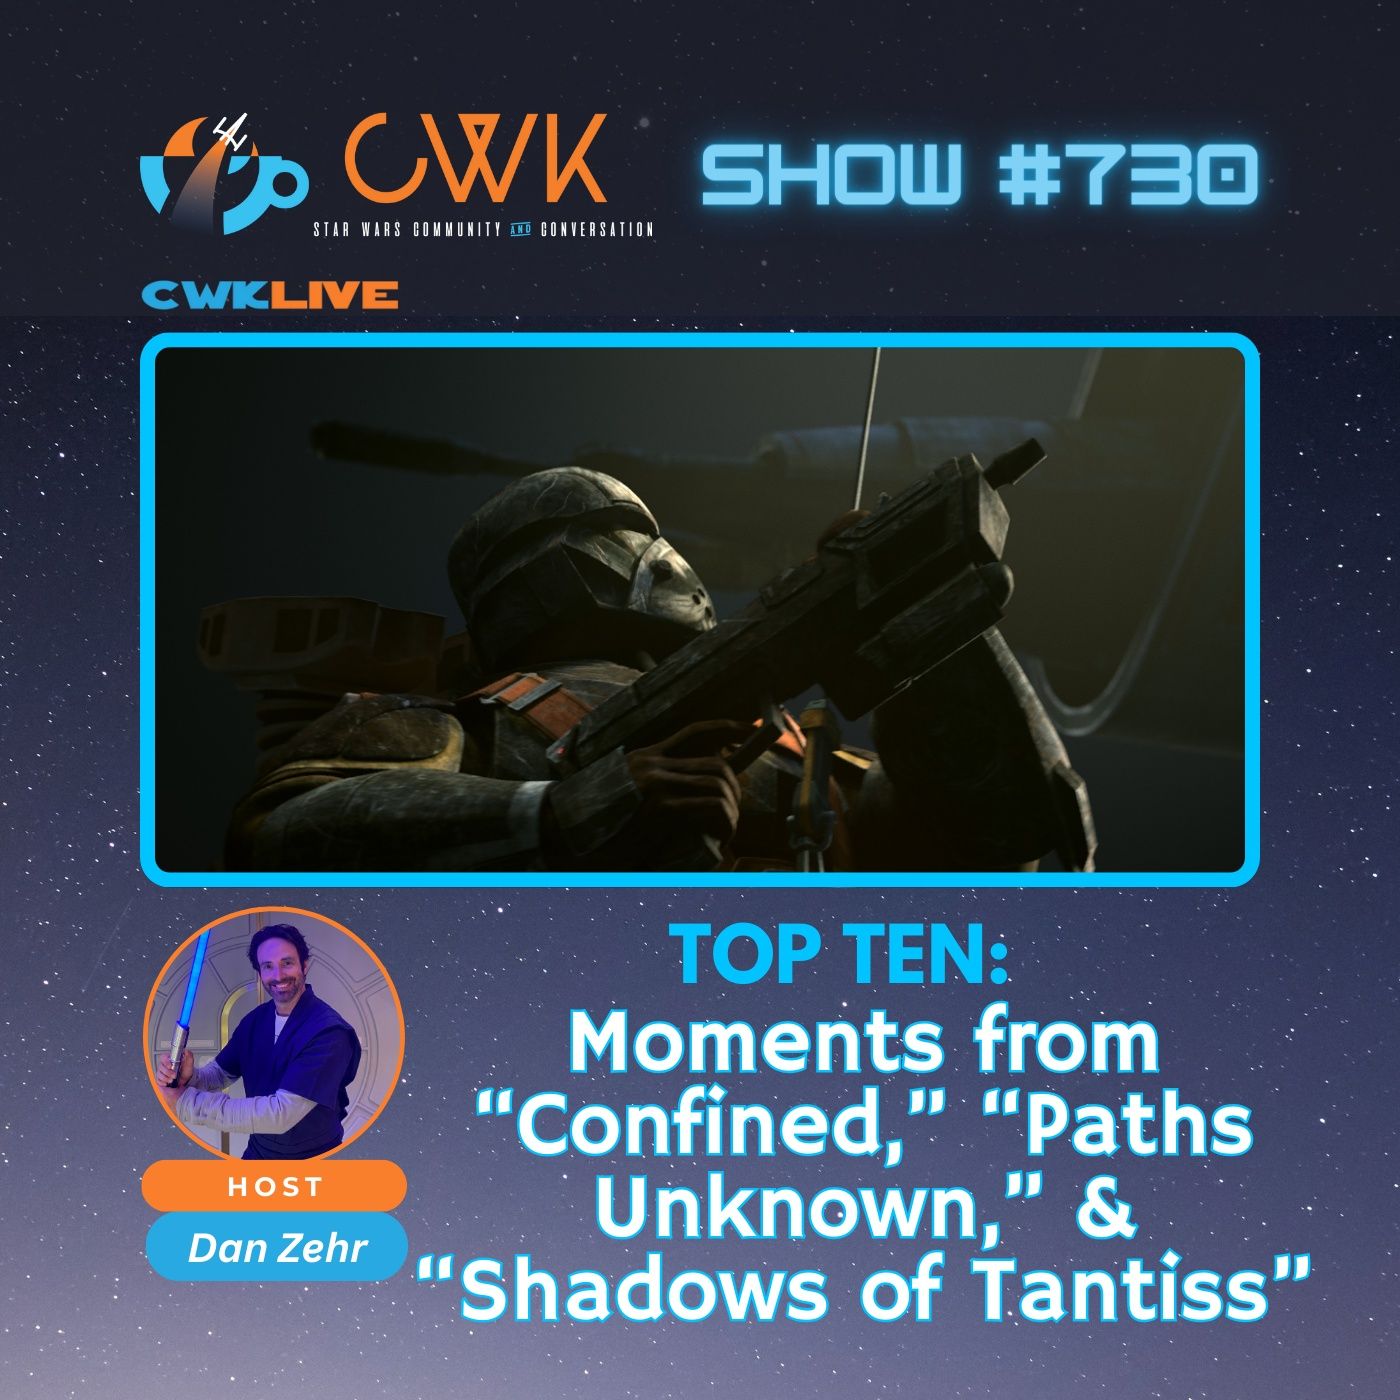 CWK Show #730 LIVE: Top 10 Moments from The Bad Batch "Confined," "Paths Unknown," & "Shadows of Tantiss